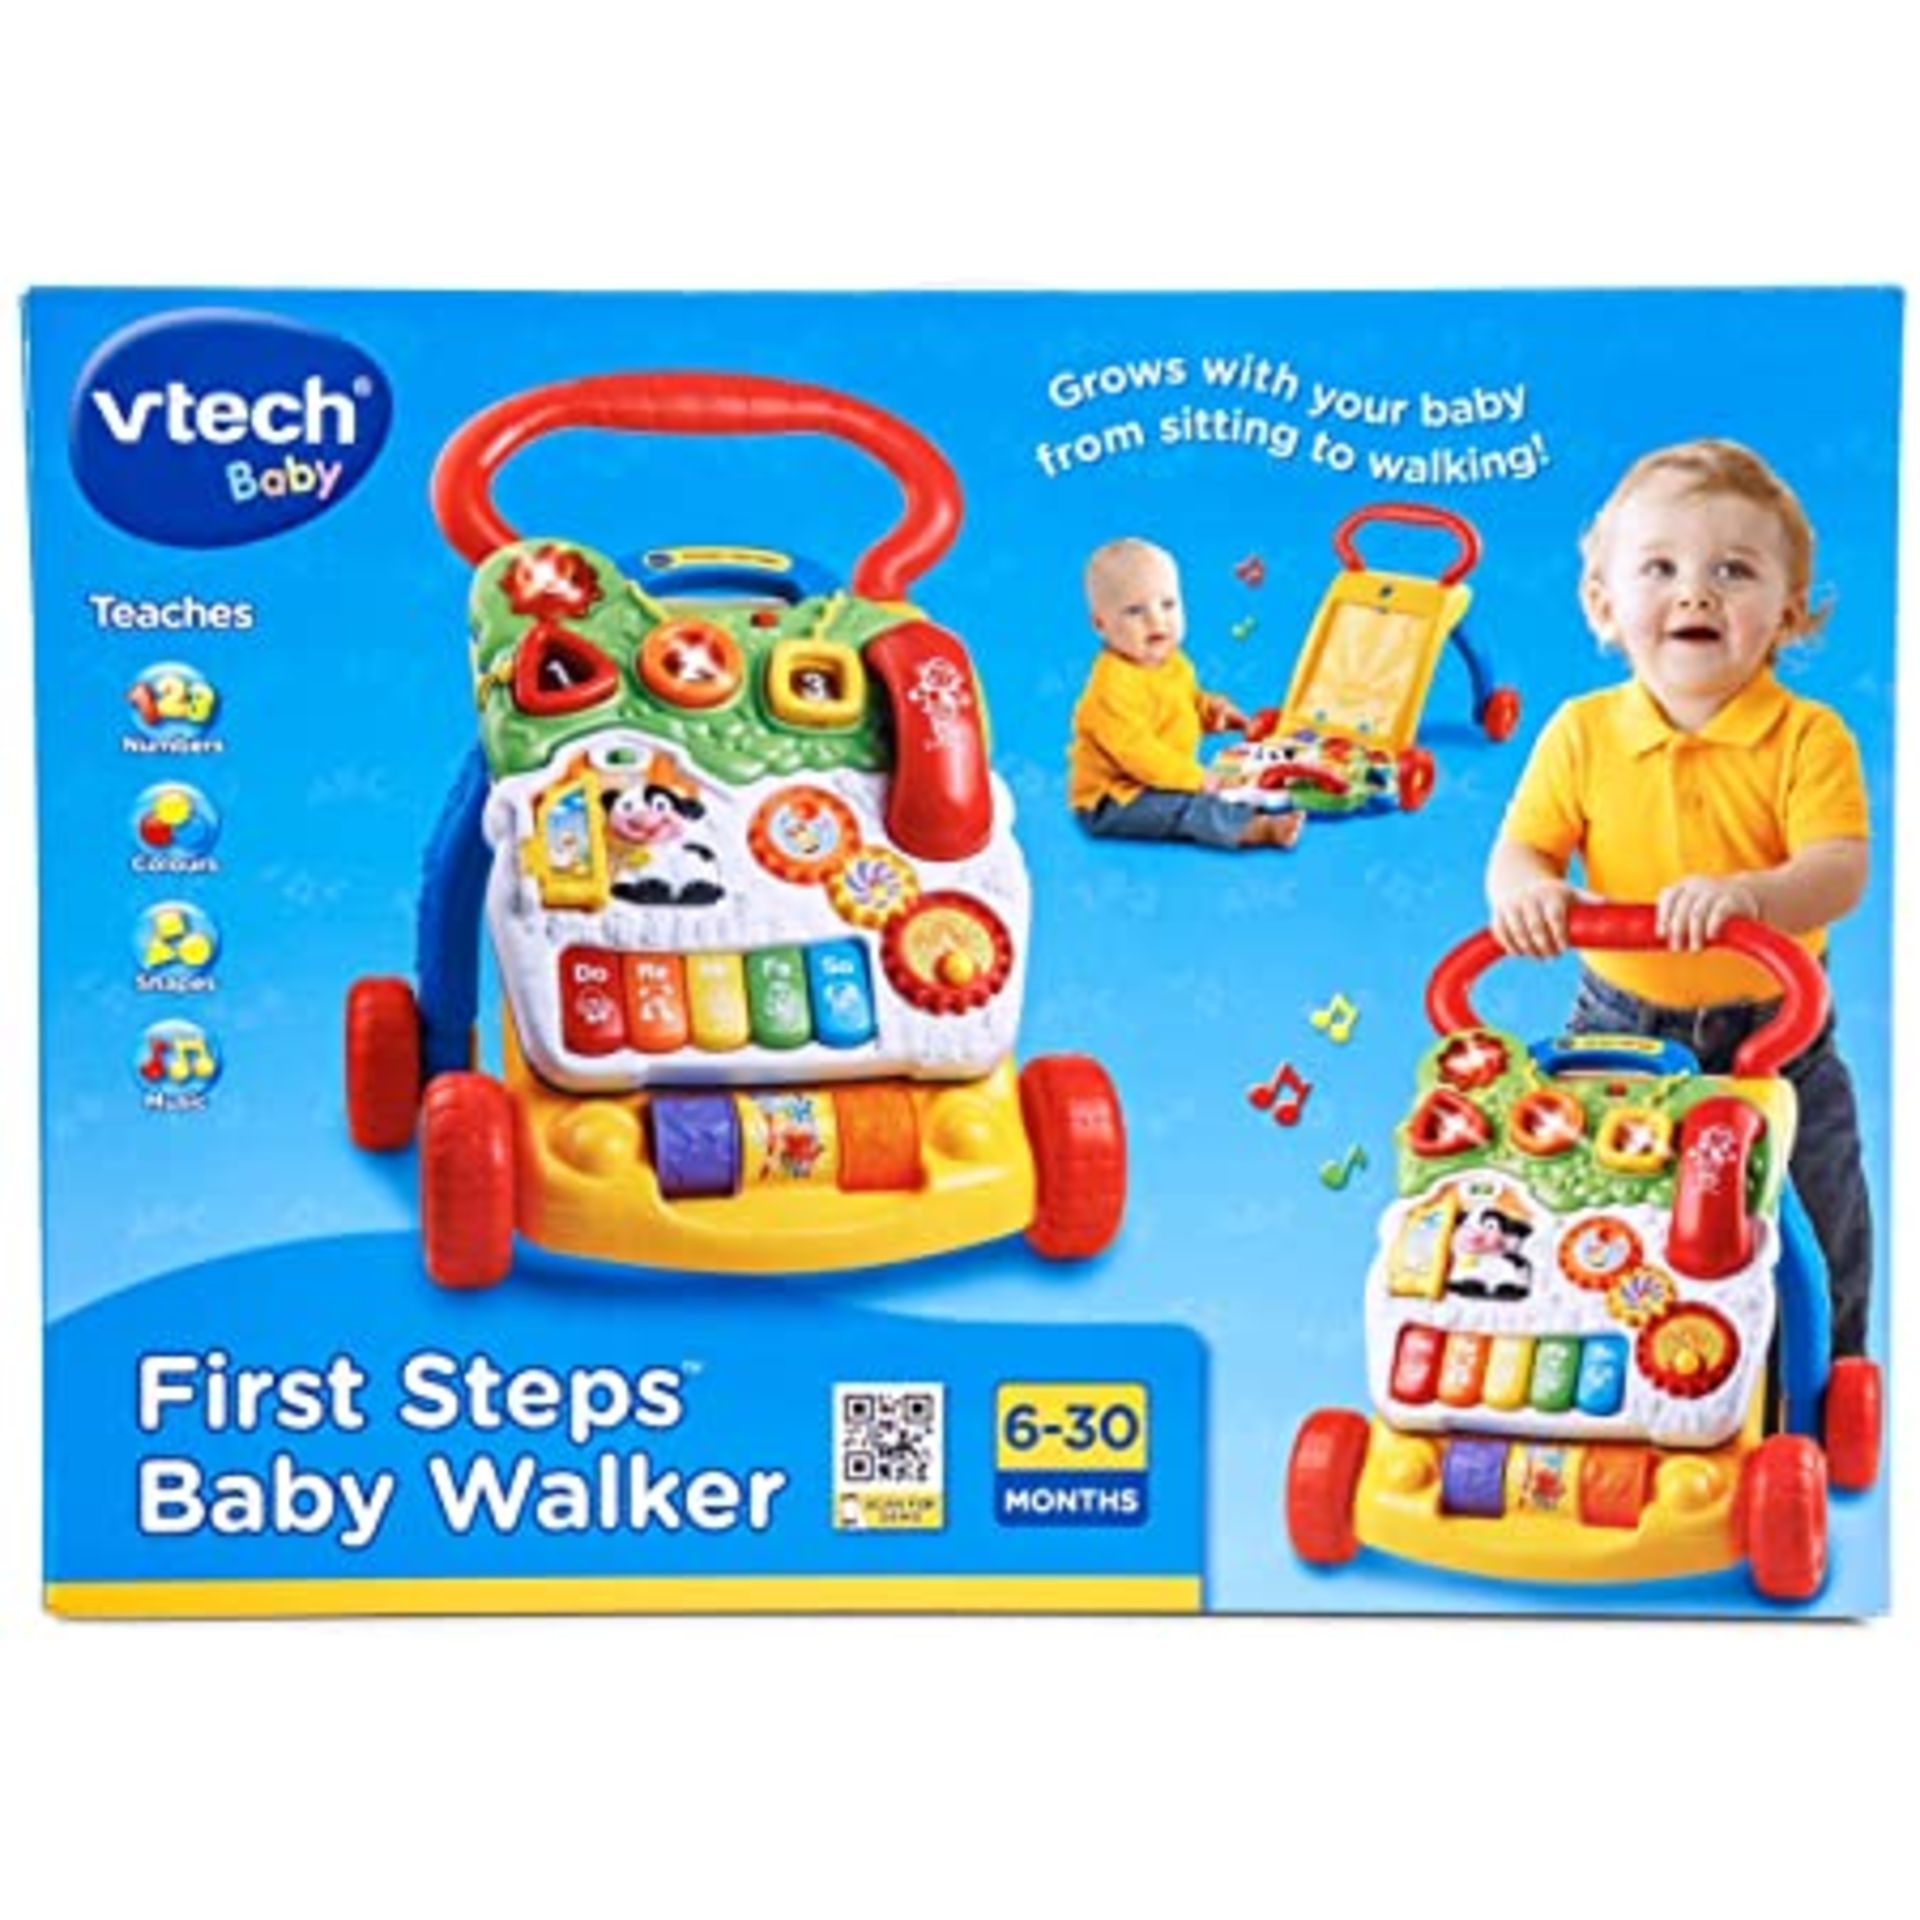 (R5J) Toys. 3 Items. 1 X Vtech Baby 2 In 1 Grow With Me First Steps Baby Walker, 1 X Spin N Play Dr